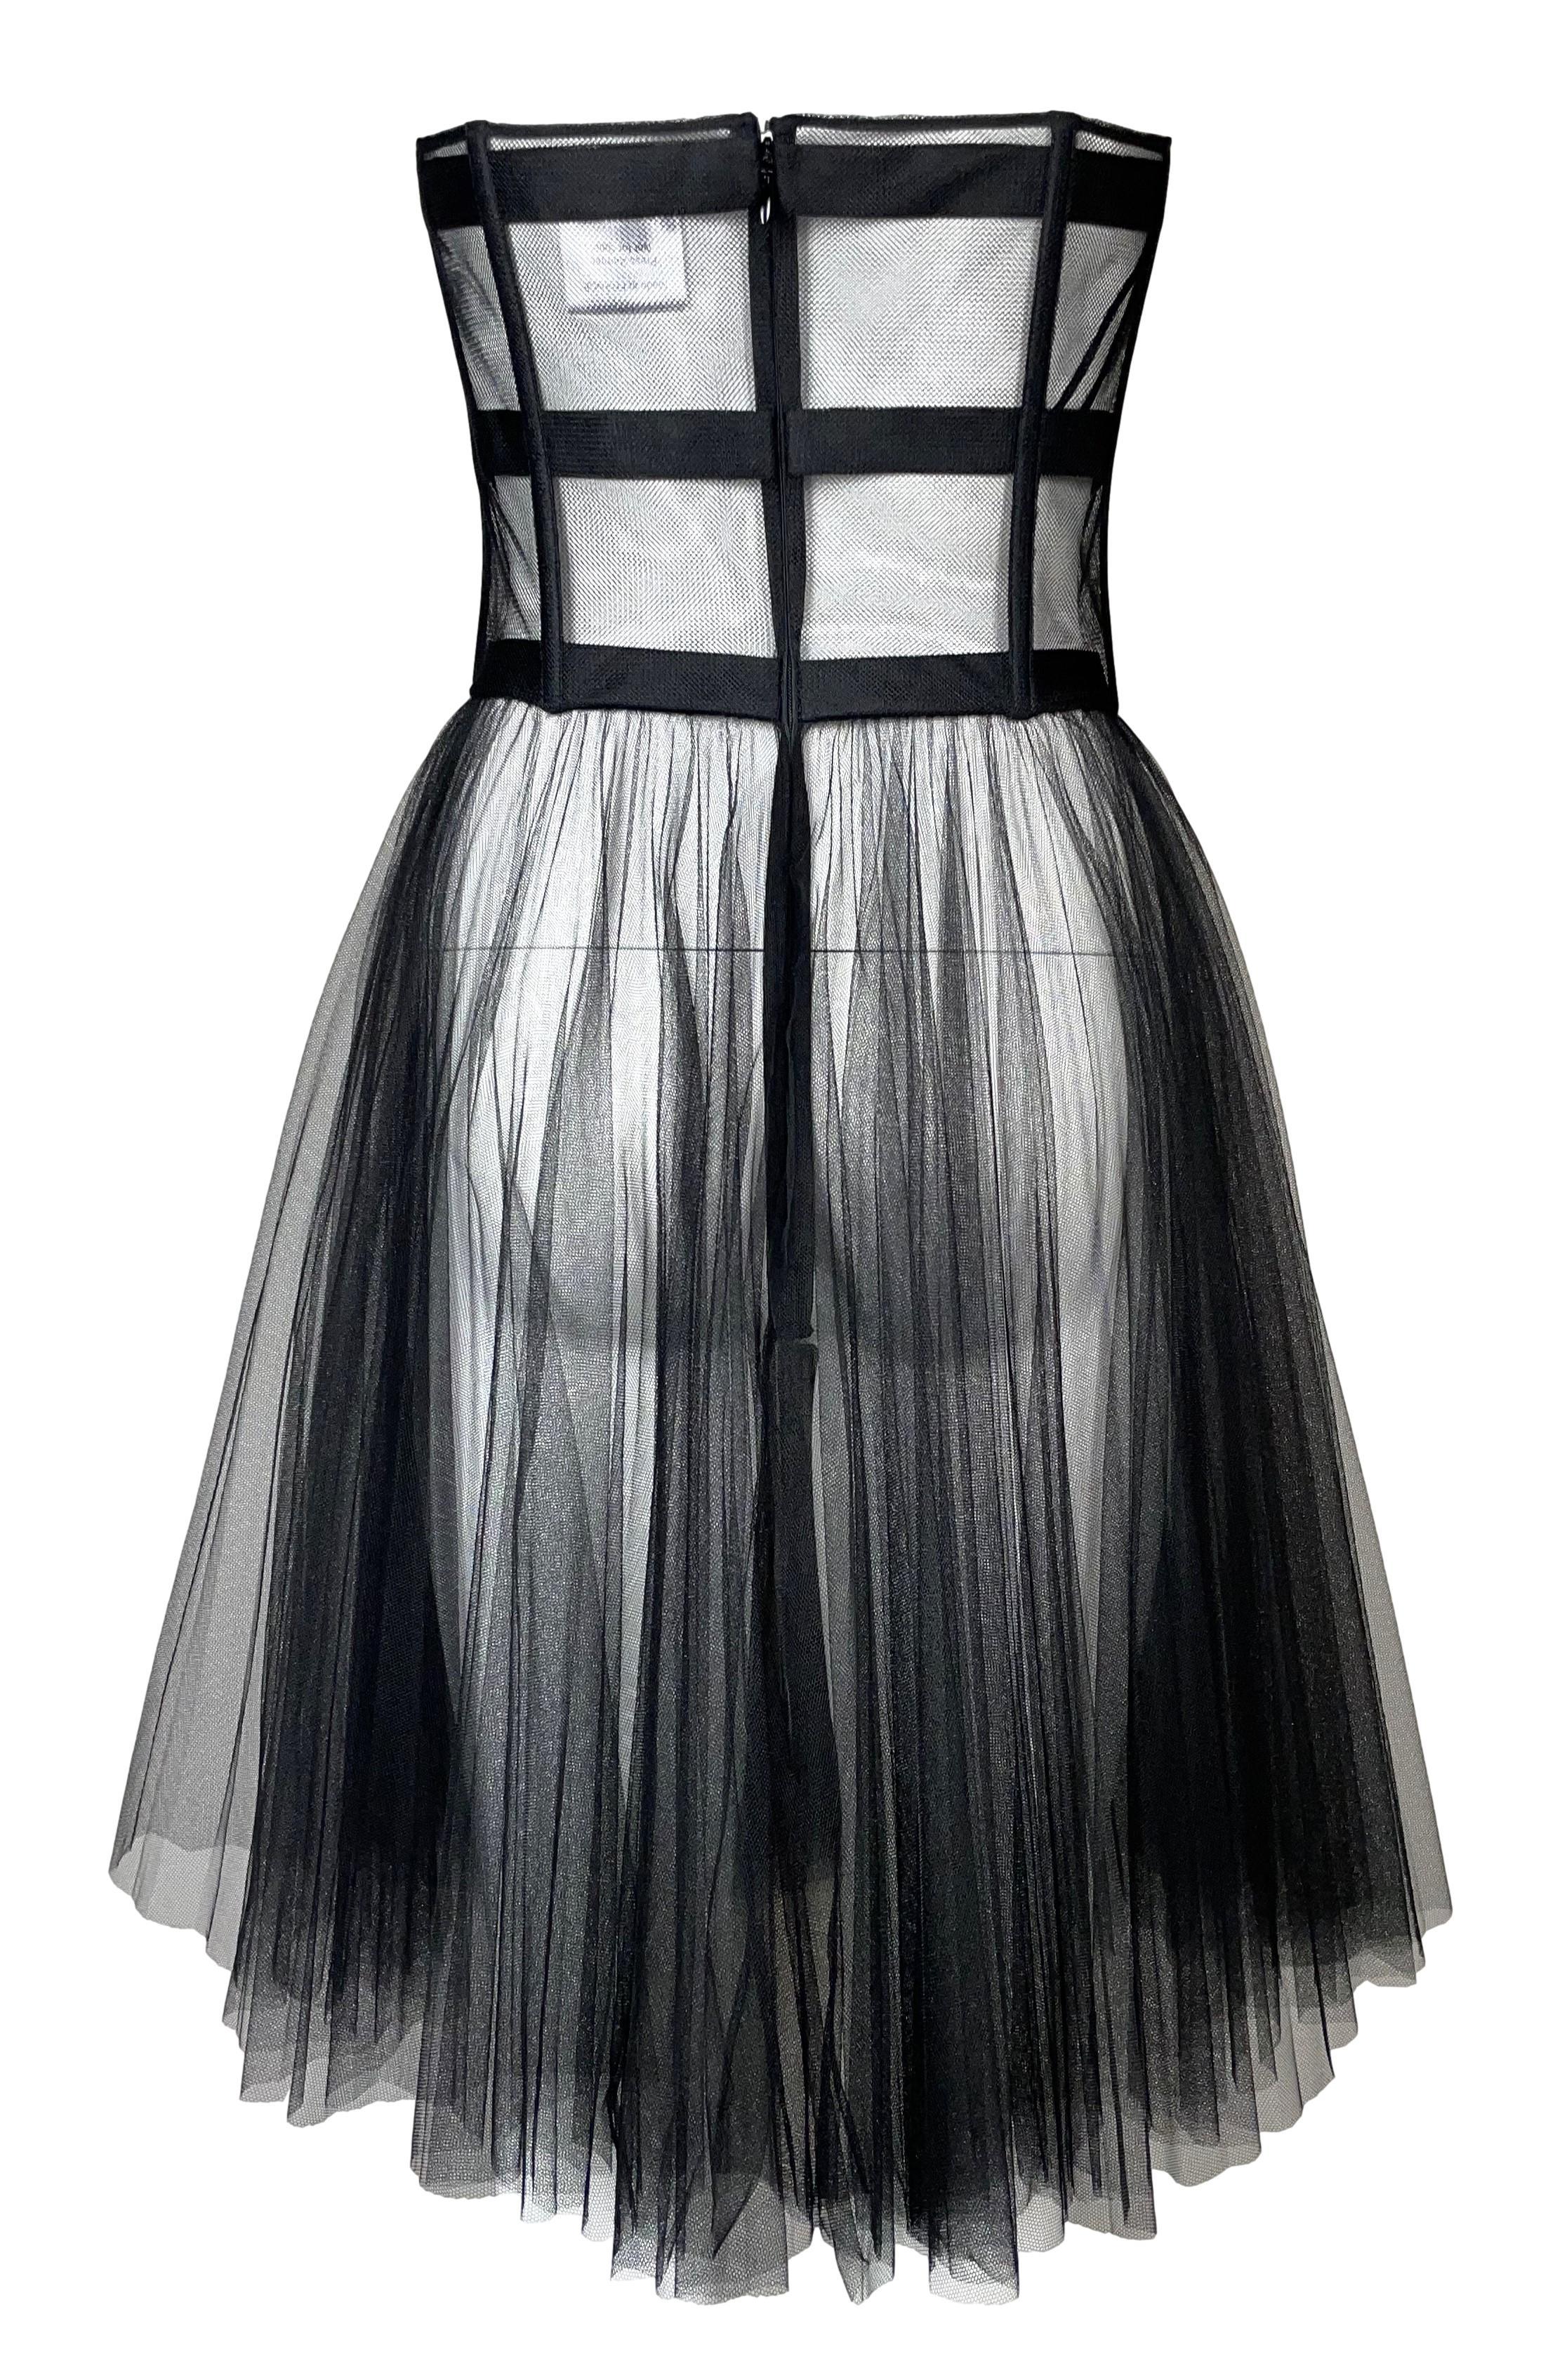 F/W 2019 Christian Dior Sheer Black Tulle Mesh Cage Bustier High Waist Skirt In Excellent Condition In Yukon, OK